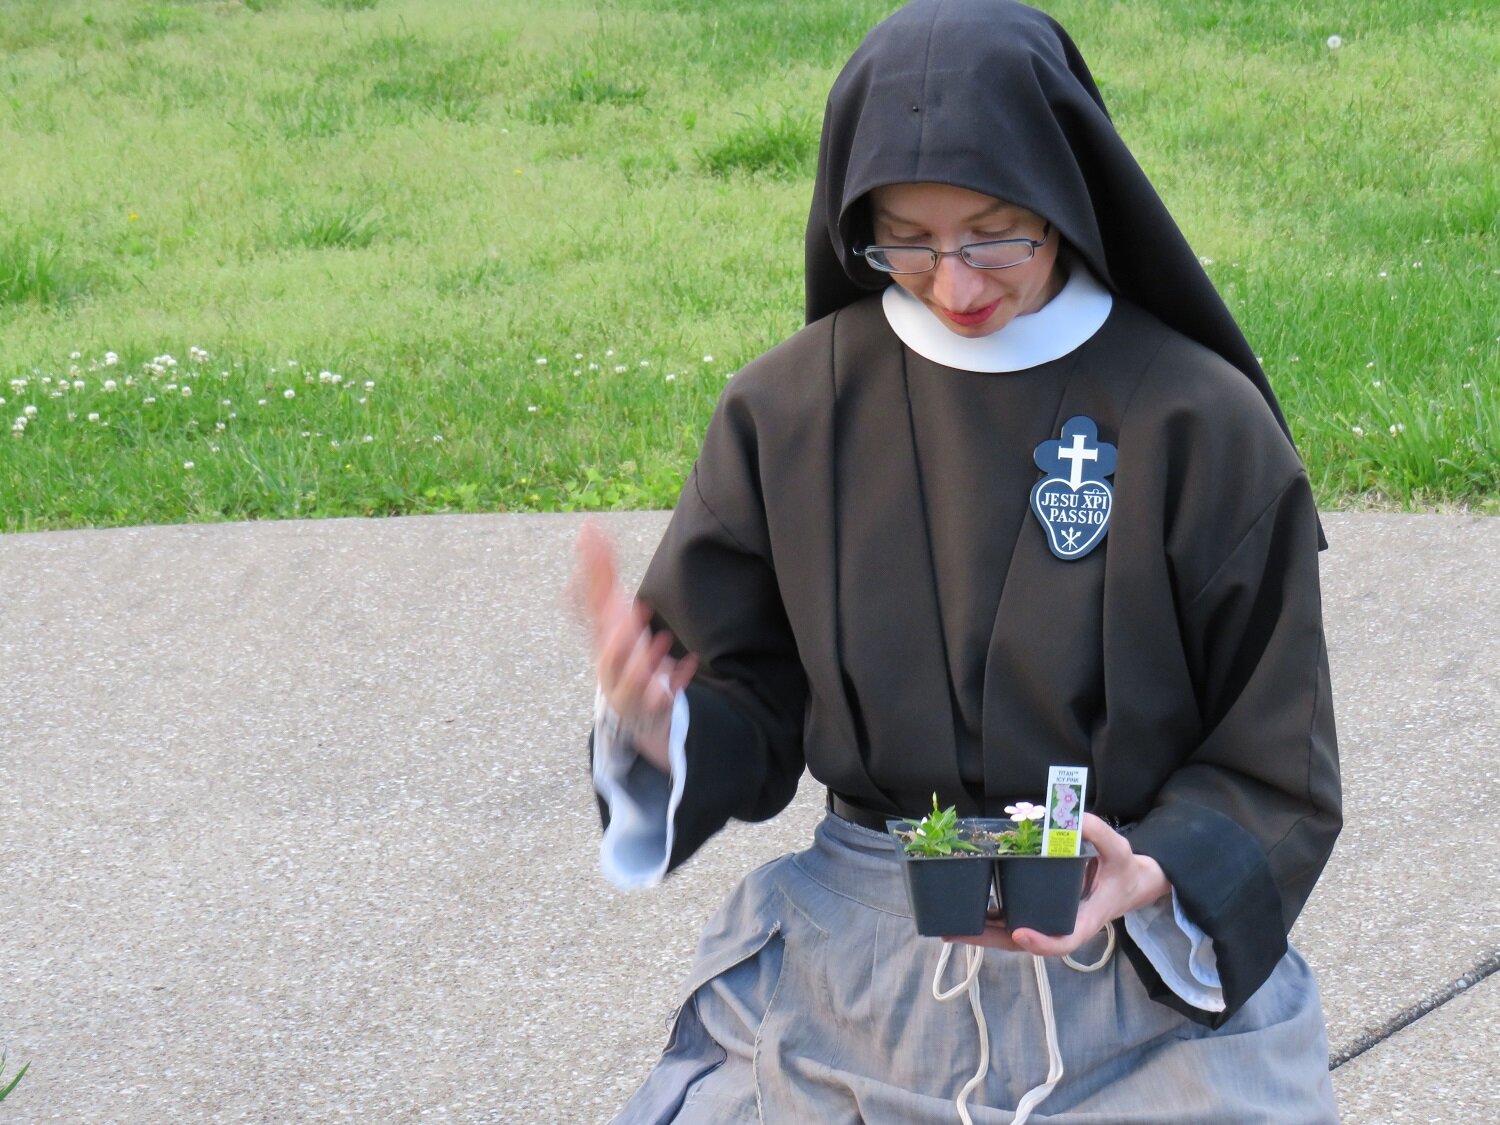  Sr. Cecilia Maria exhorts her new flowers to grow big and strong! 